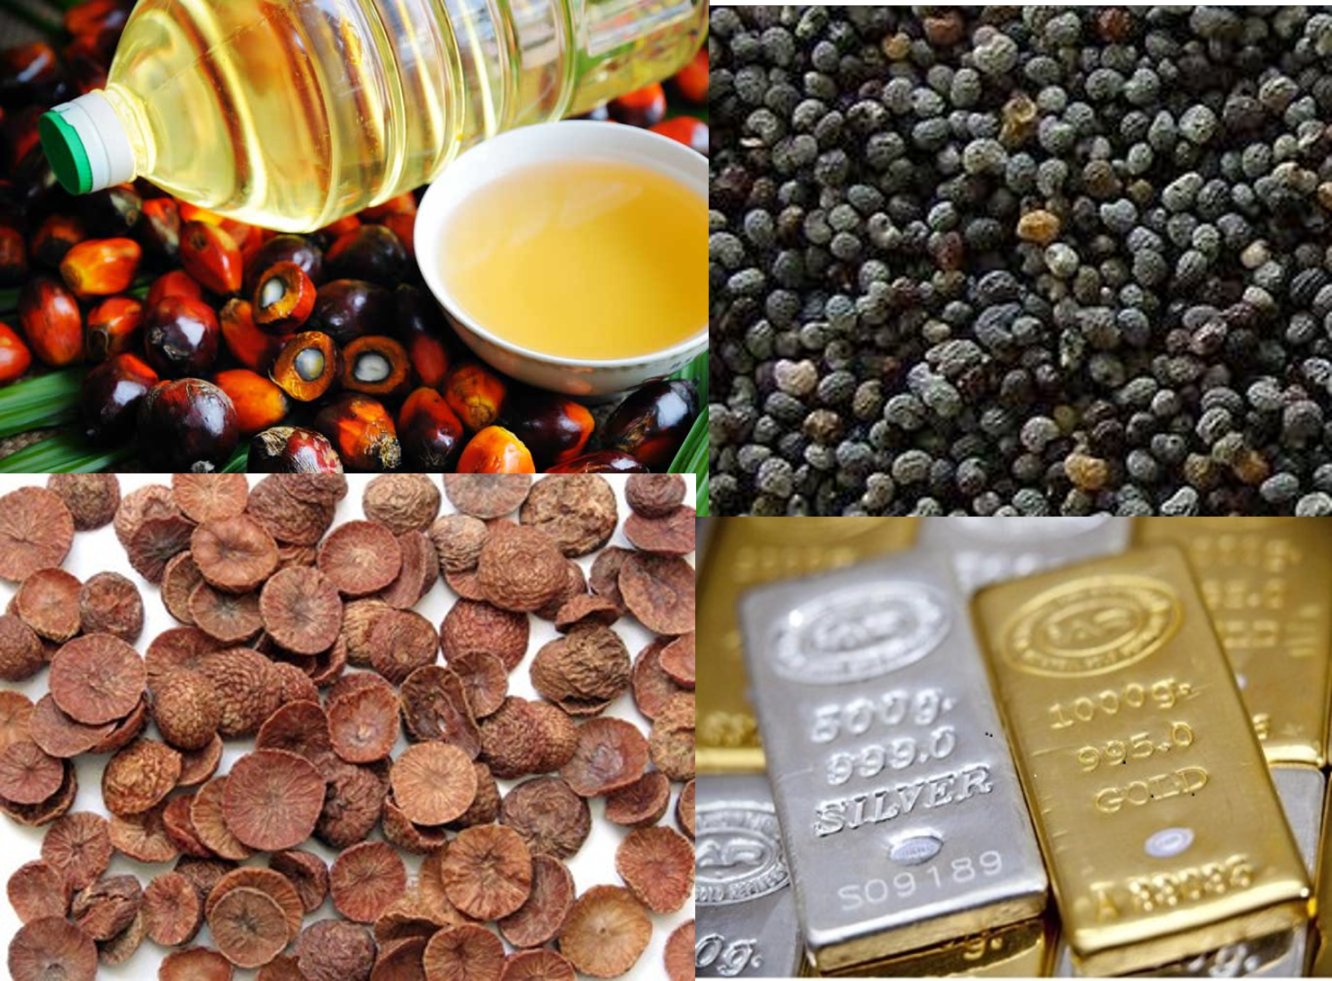 tariff value for gold & silver, brass scrap, poppy seeds, edible oils, areca nuts